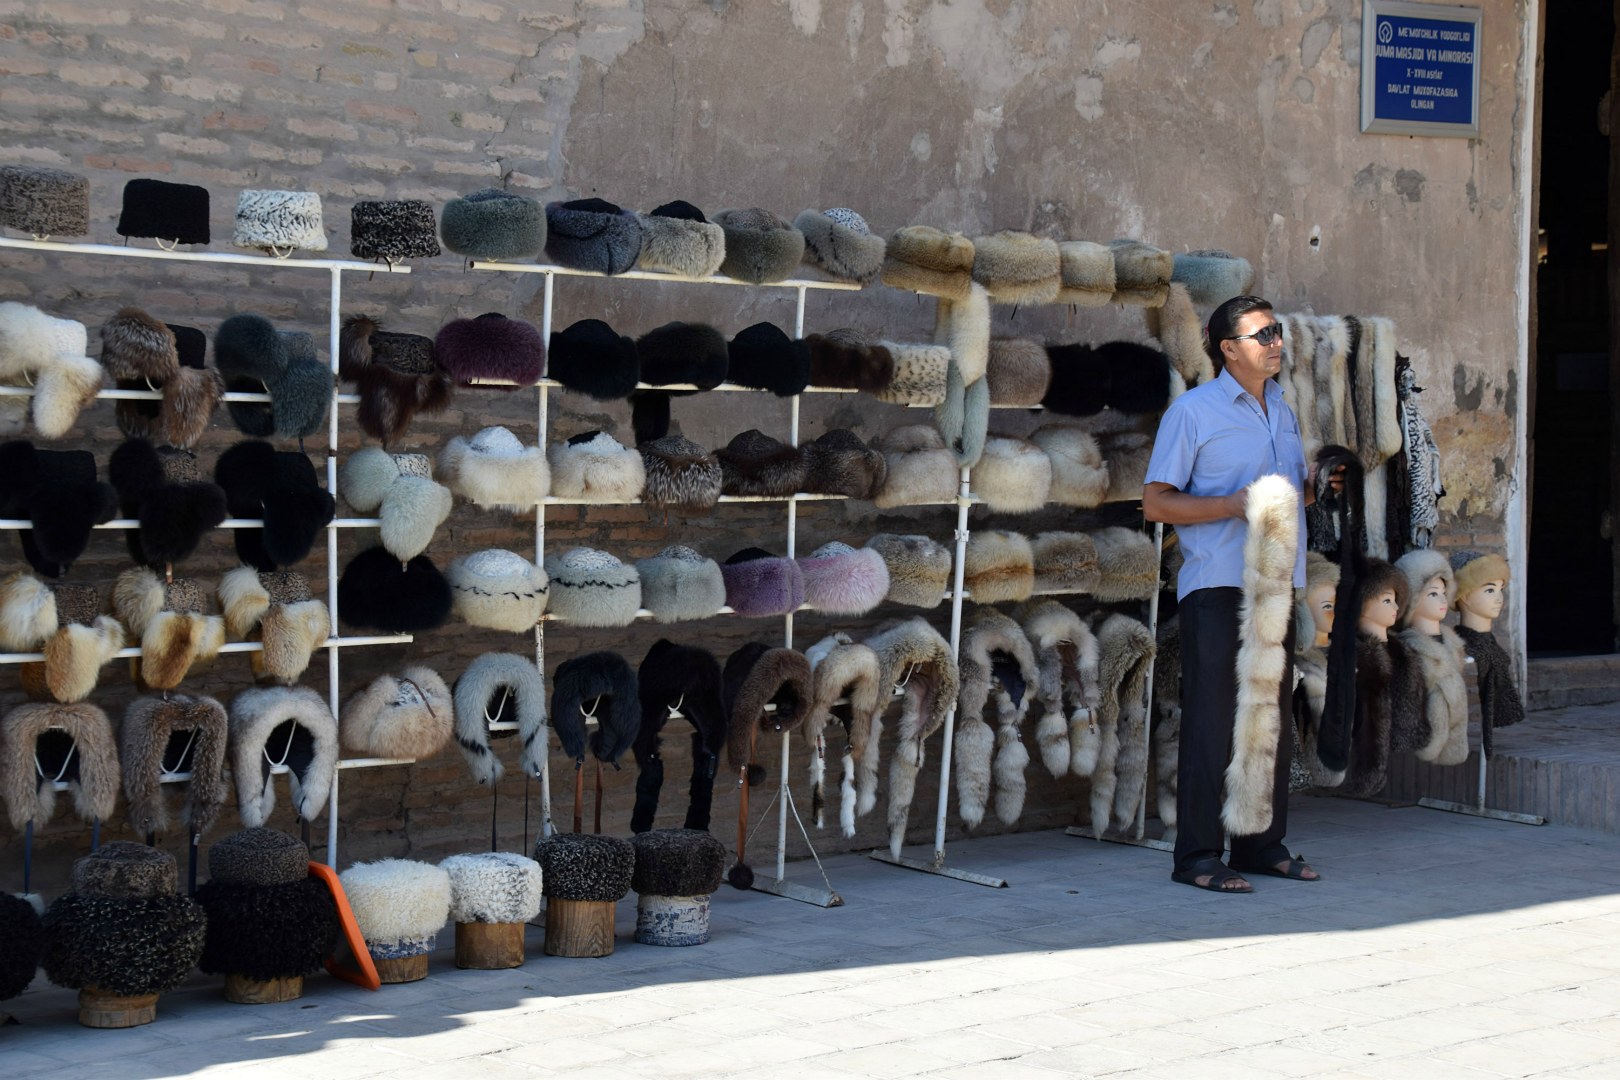 Hats for sale, Khiva